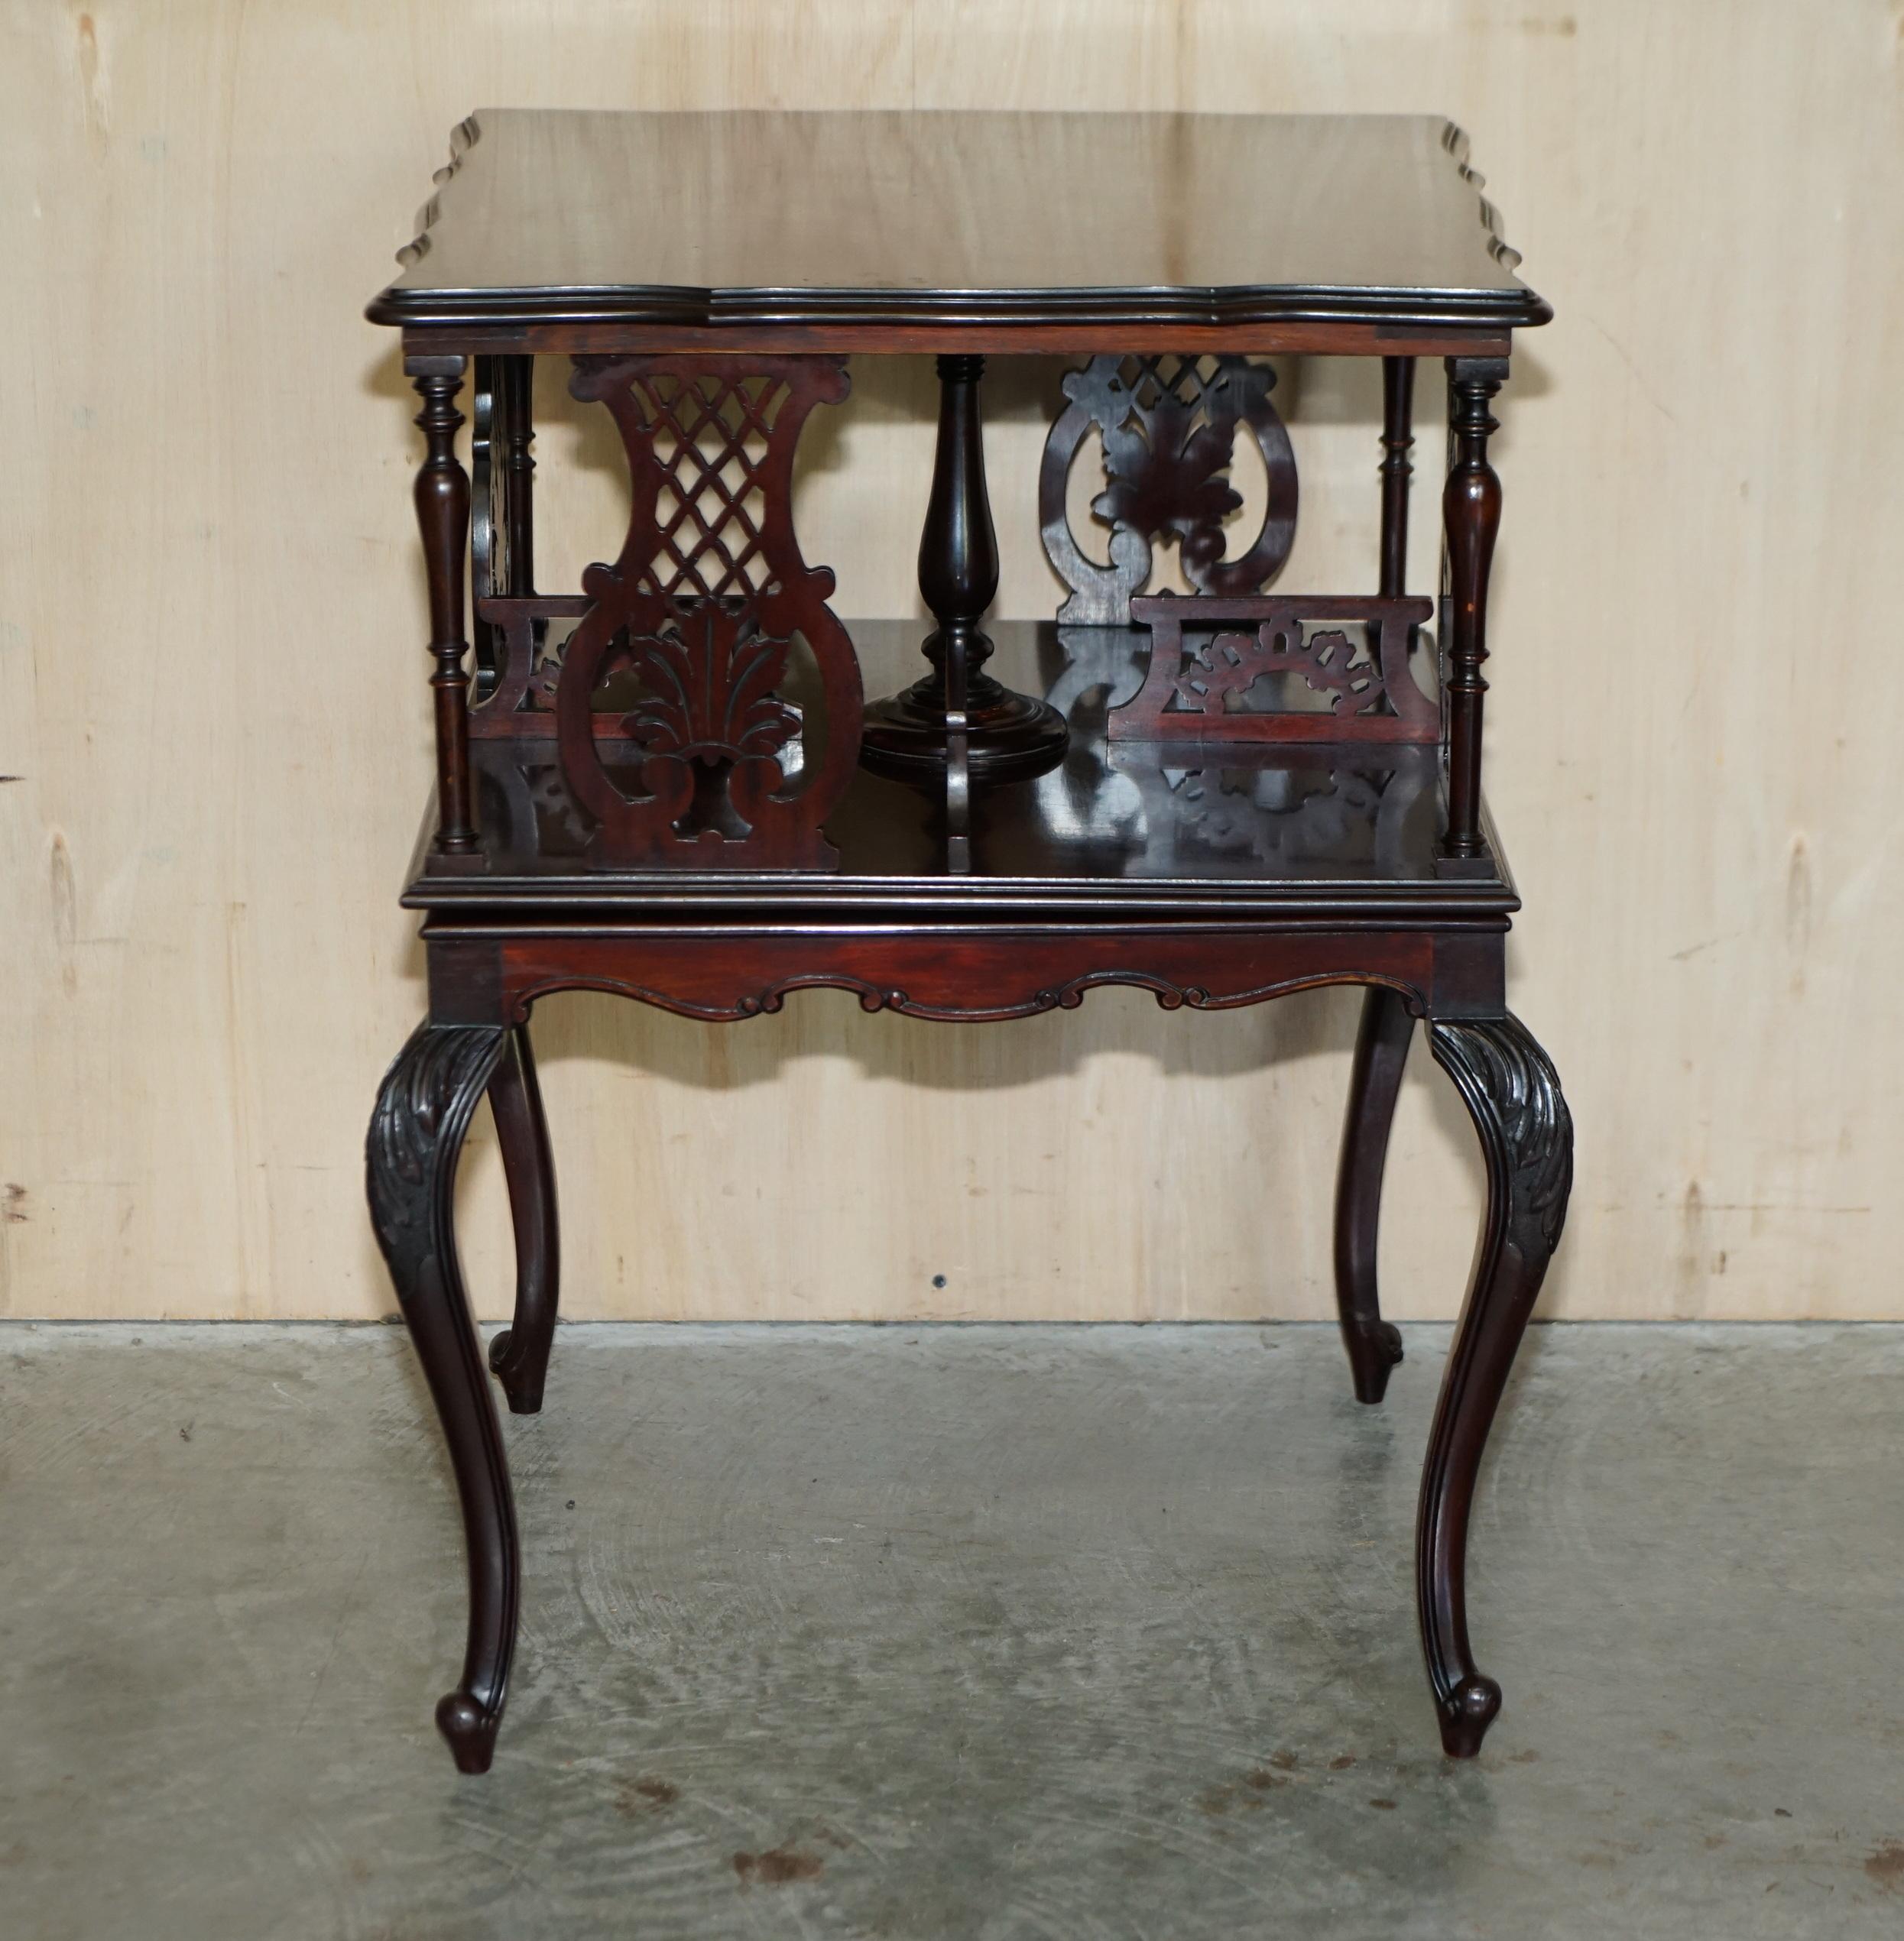 We are delighted to offer for sale this very well made English mahogany circa 1880-1900 Aesthetic Movement revolving bookcase table with nicely carved cabriolet legs and fret work panels 

A good looking and well made piece, this is the first one